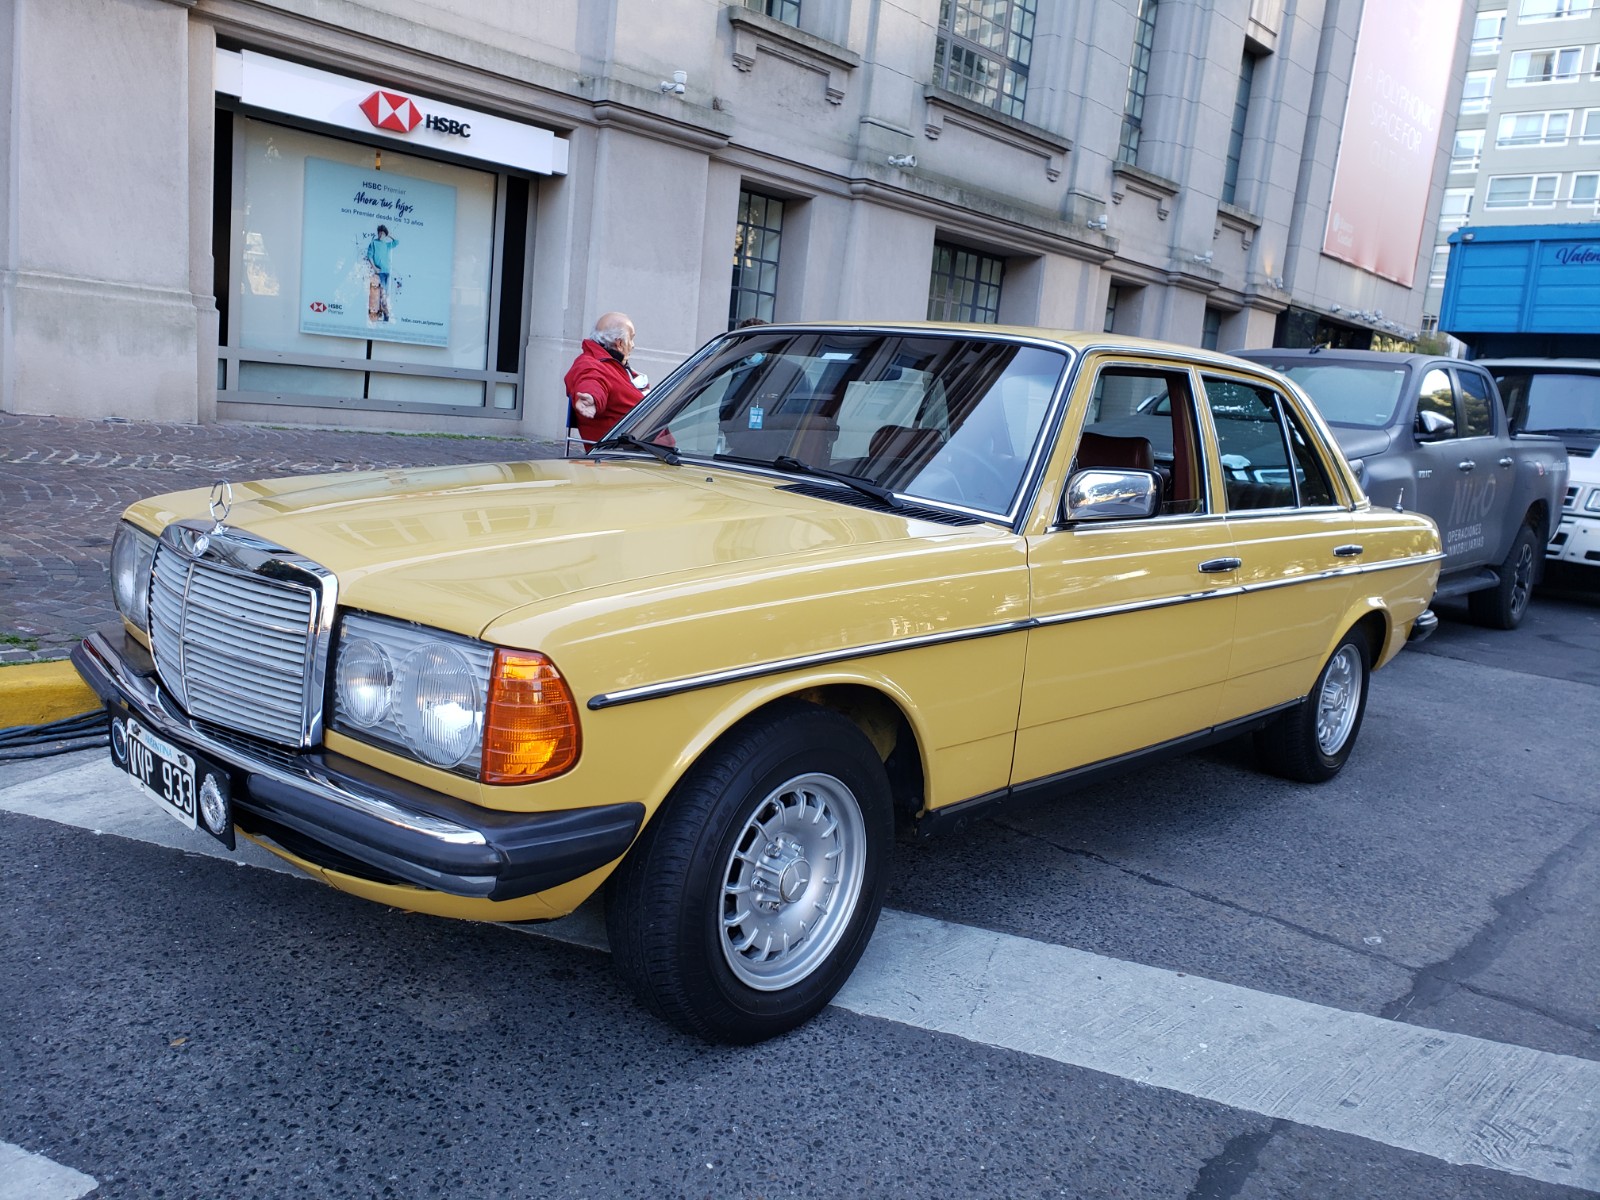 The yellow Mercedes Benz from the '80s was the main setting for the first scenes of Robert De Niro with Luis Brandoni